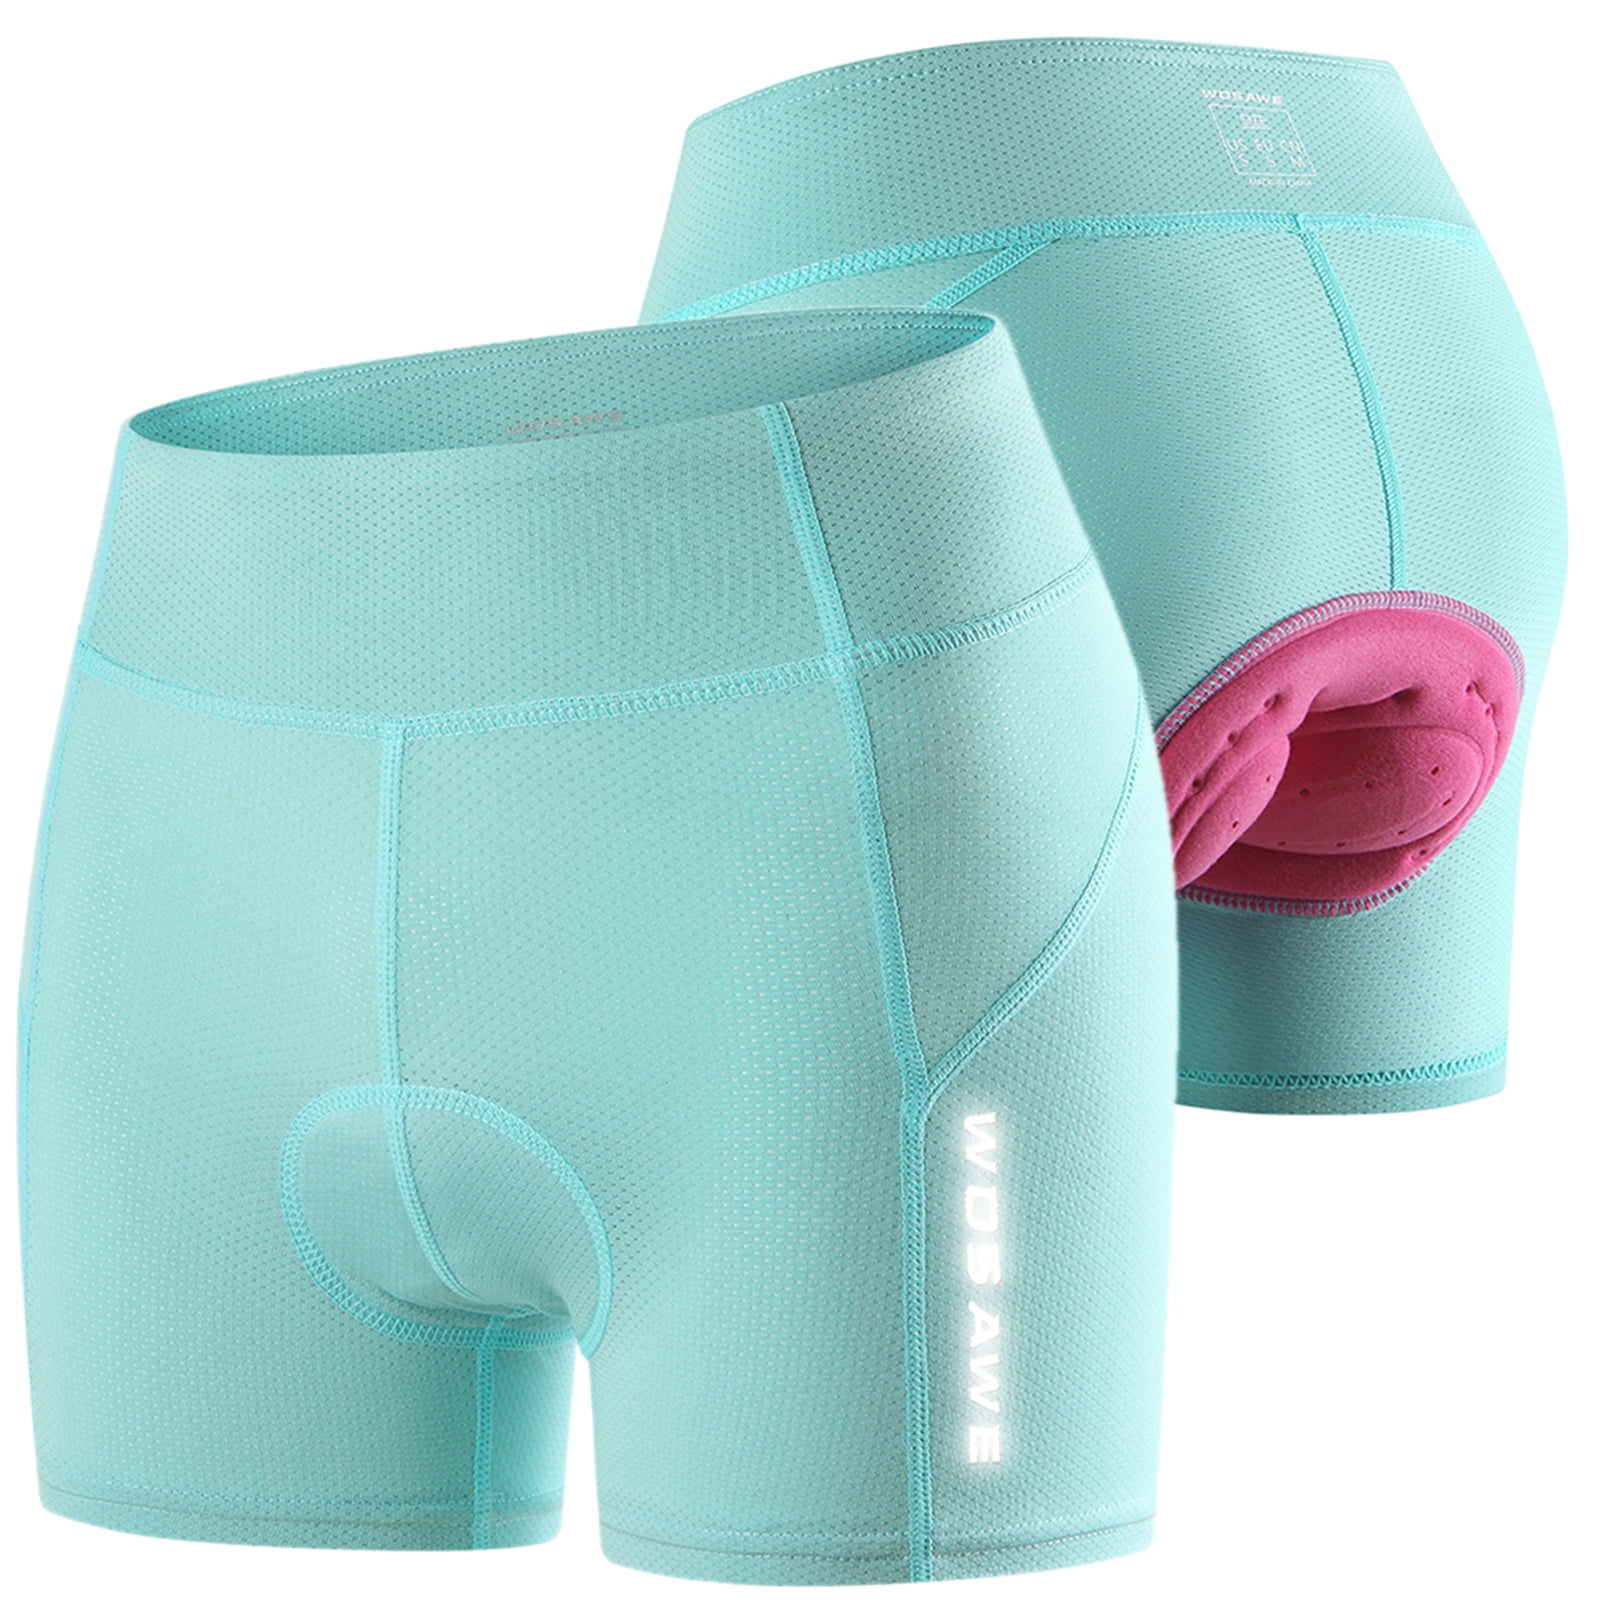 Women’s Cycling Underwear 3D Padded Bike Shorts Quick Dry Breathable MTB Mountain Biking Bicycle Briefs 